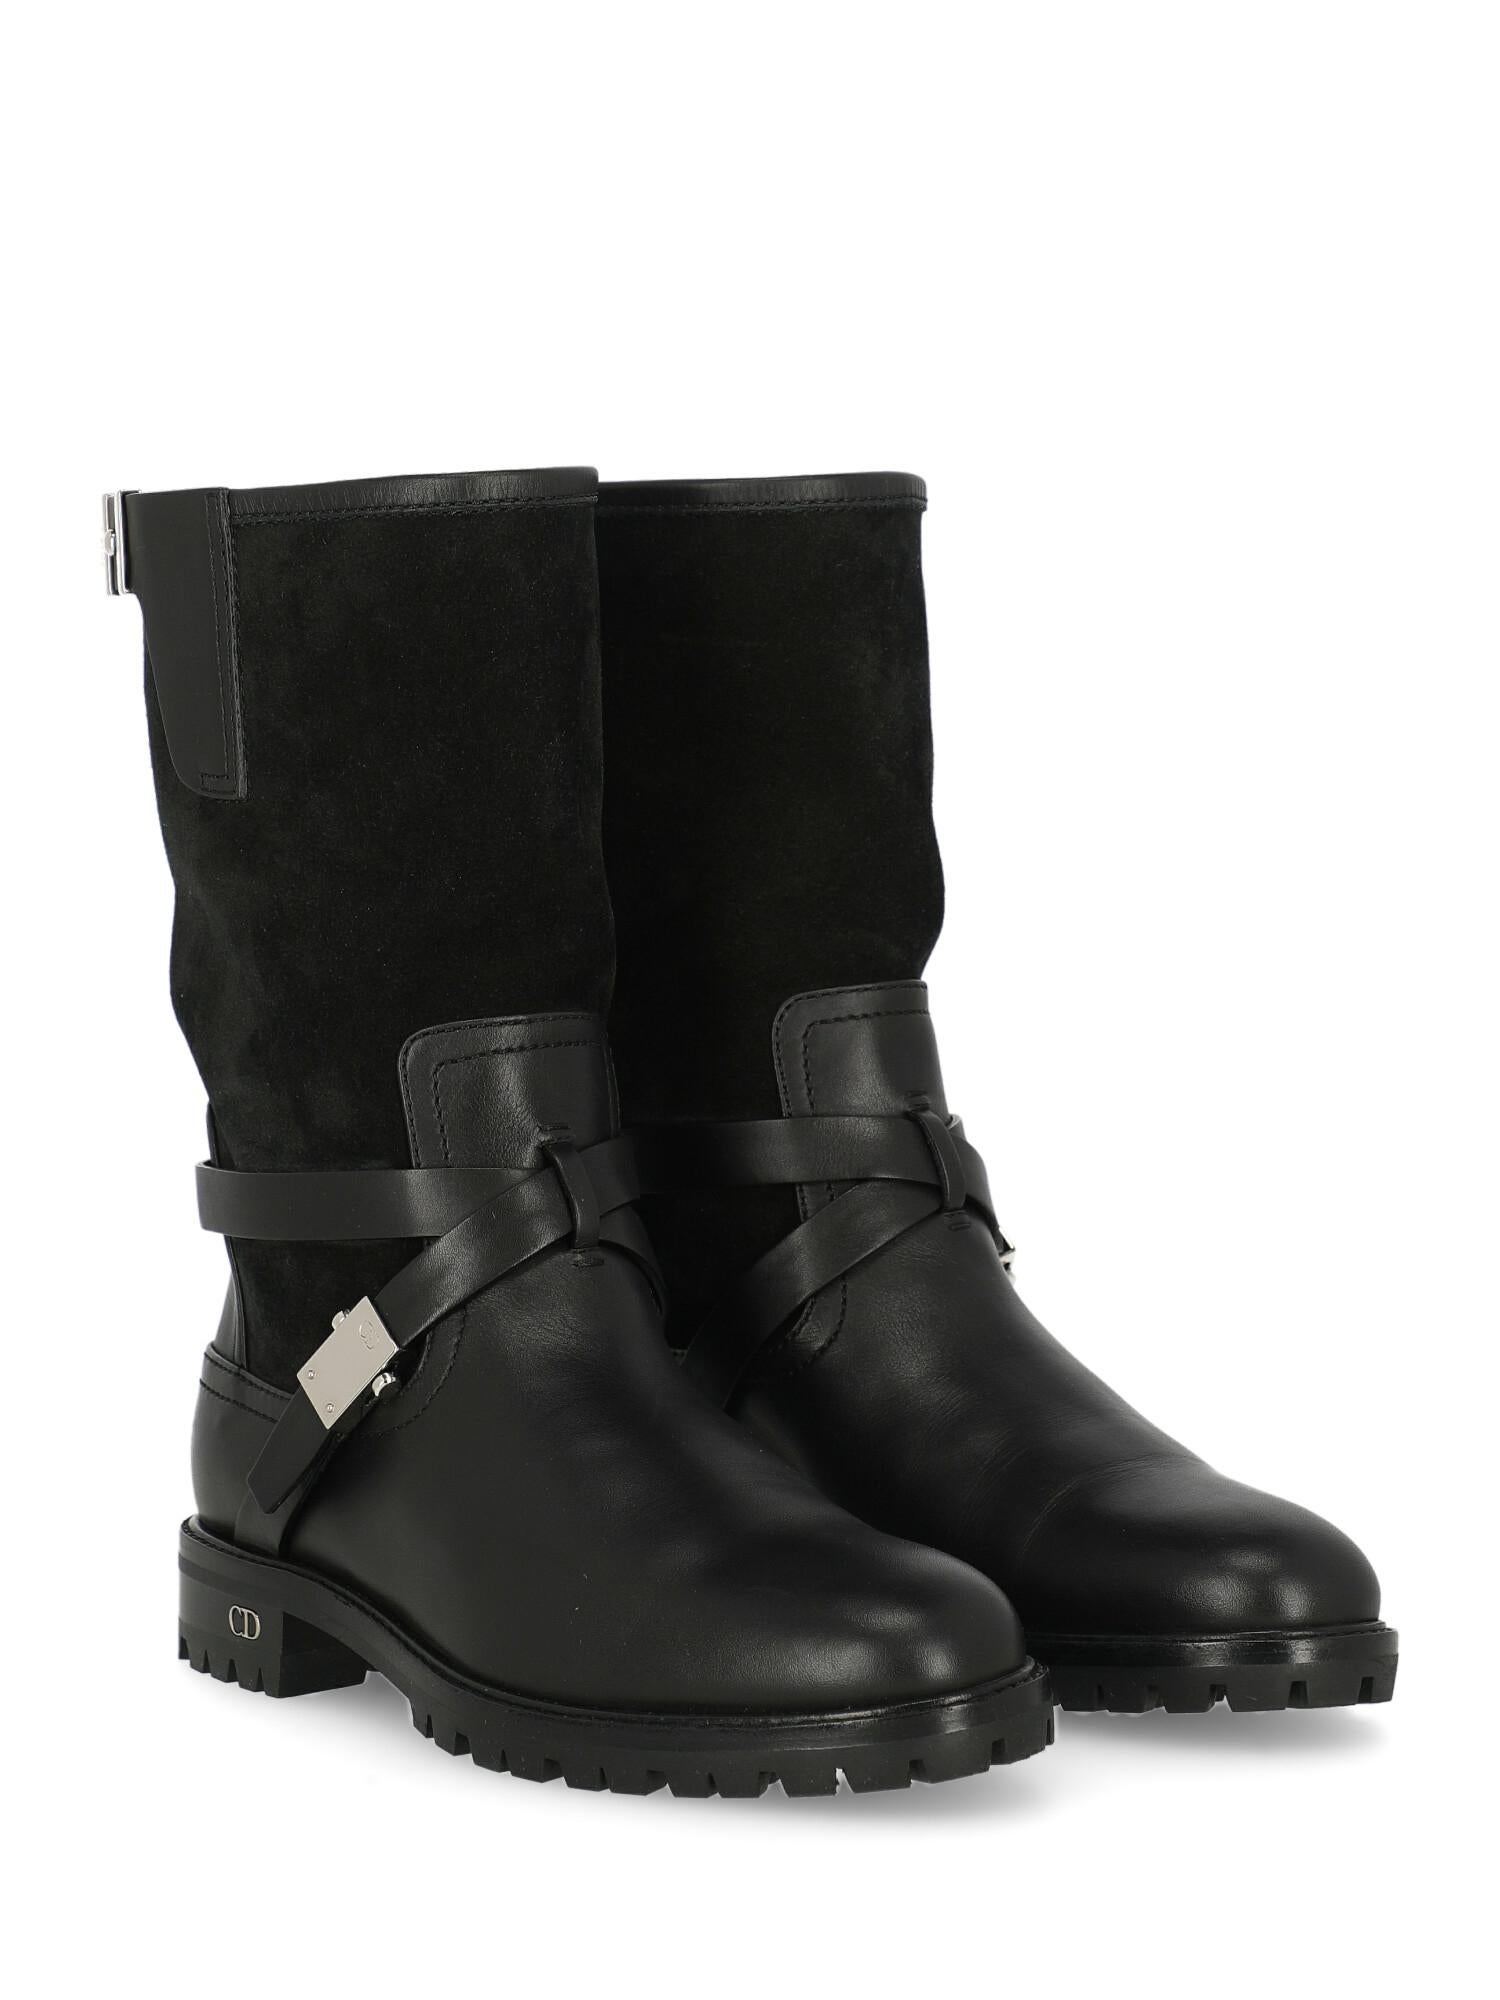 Dior Woman Ankle boots Black Leather IT 35.5 For Sale 2